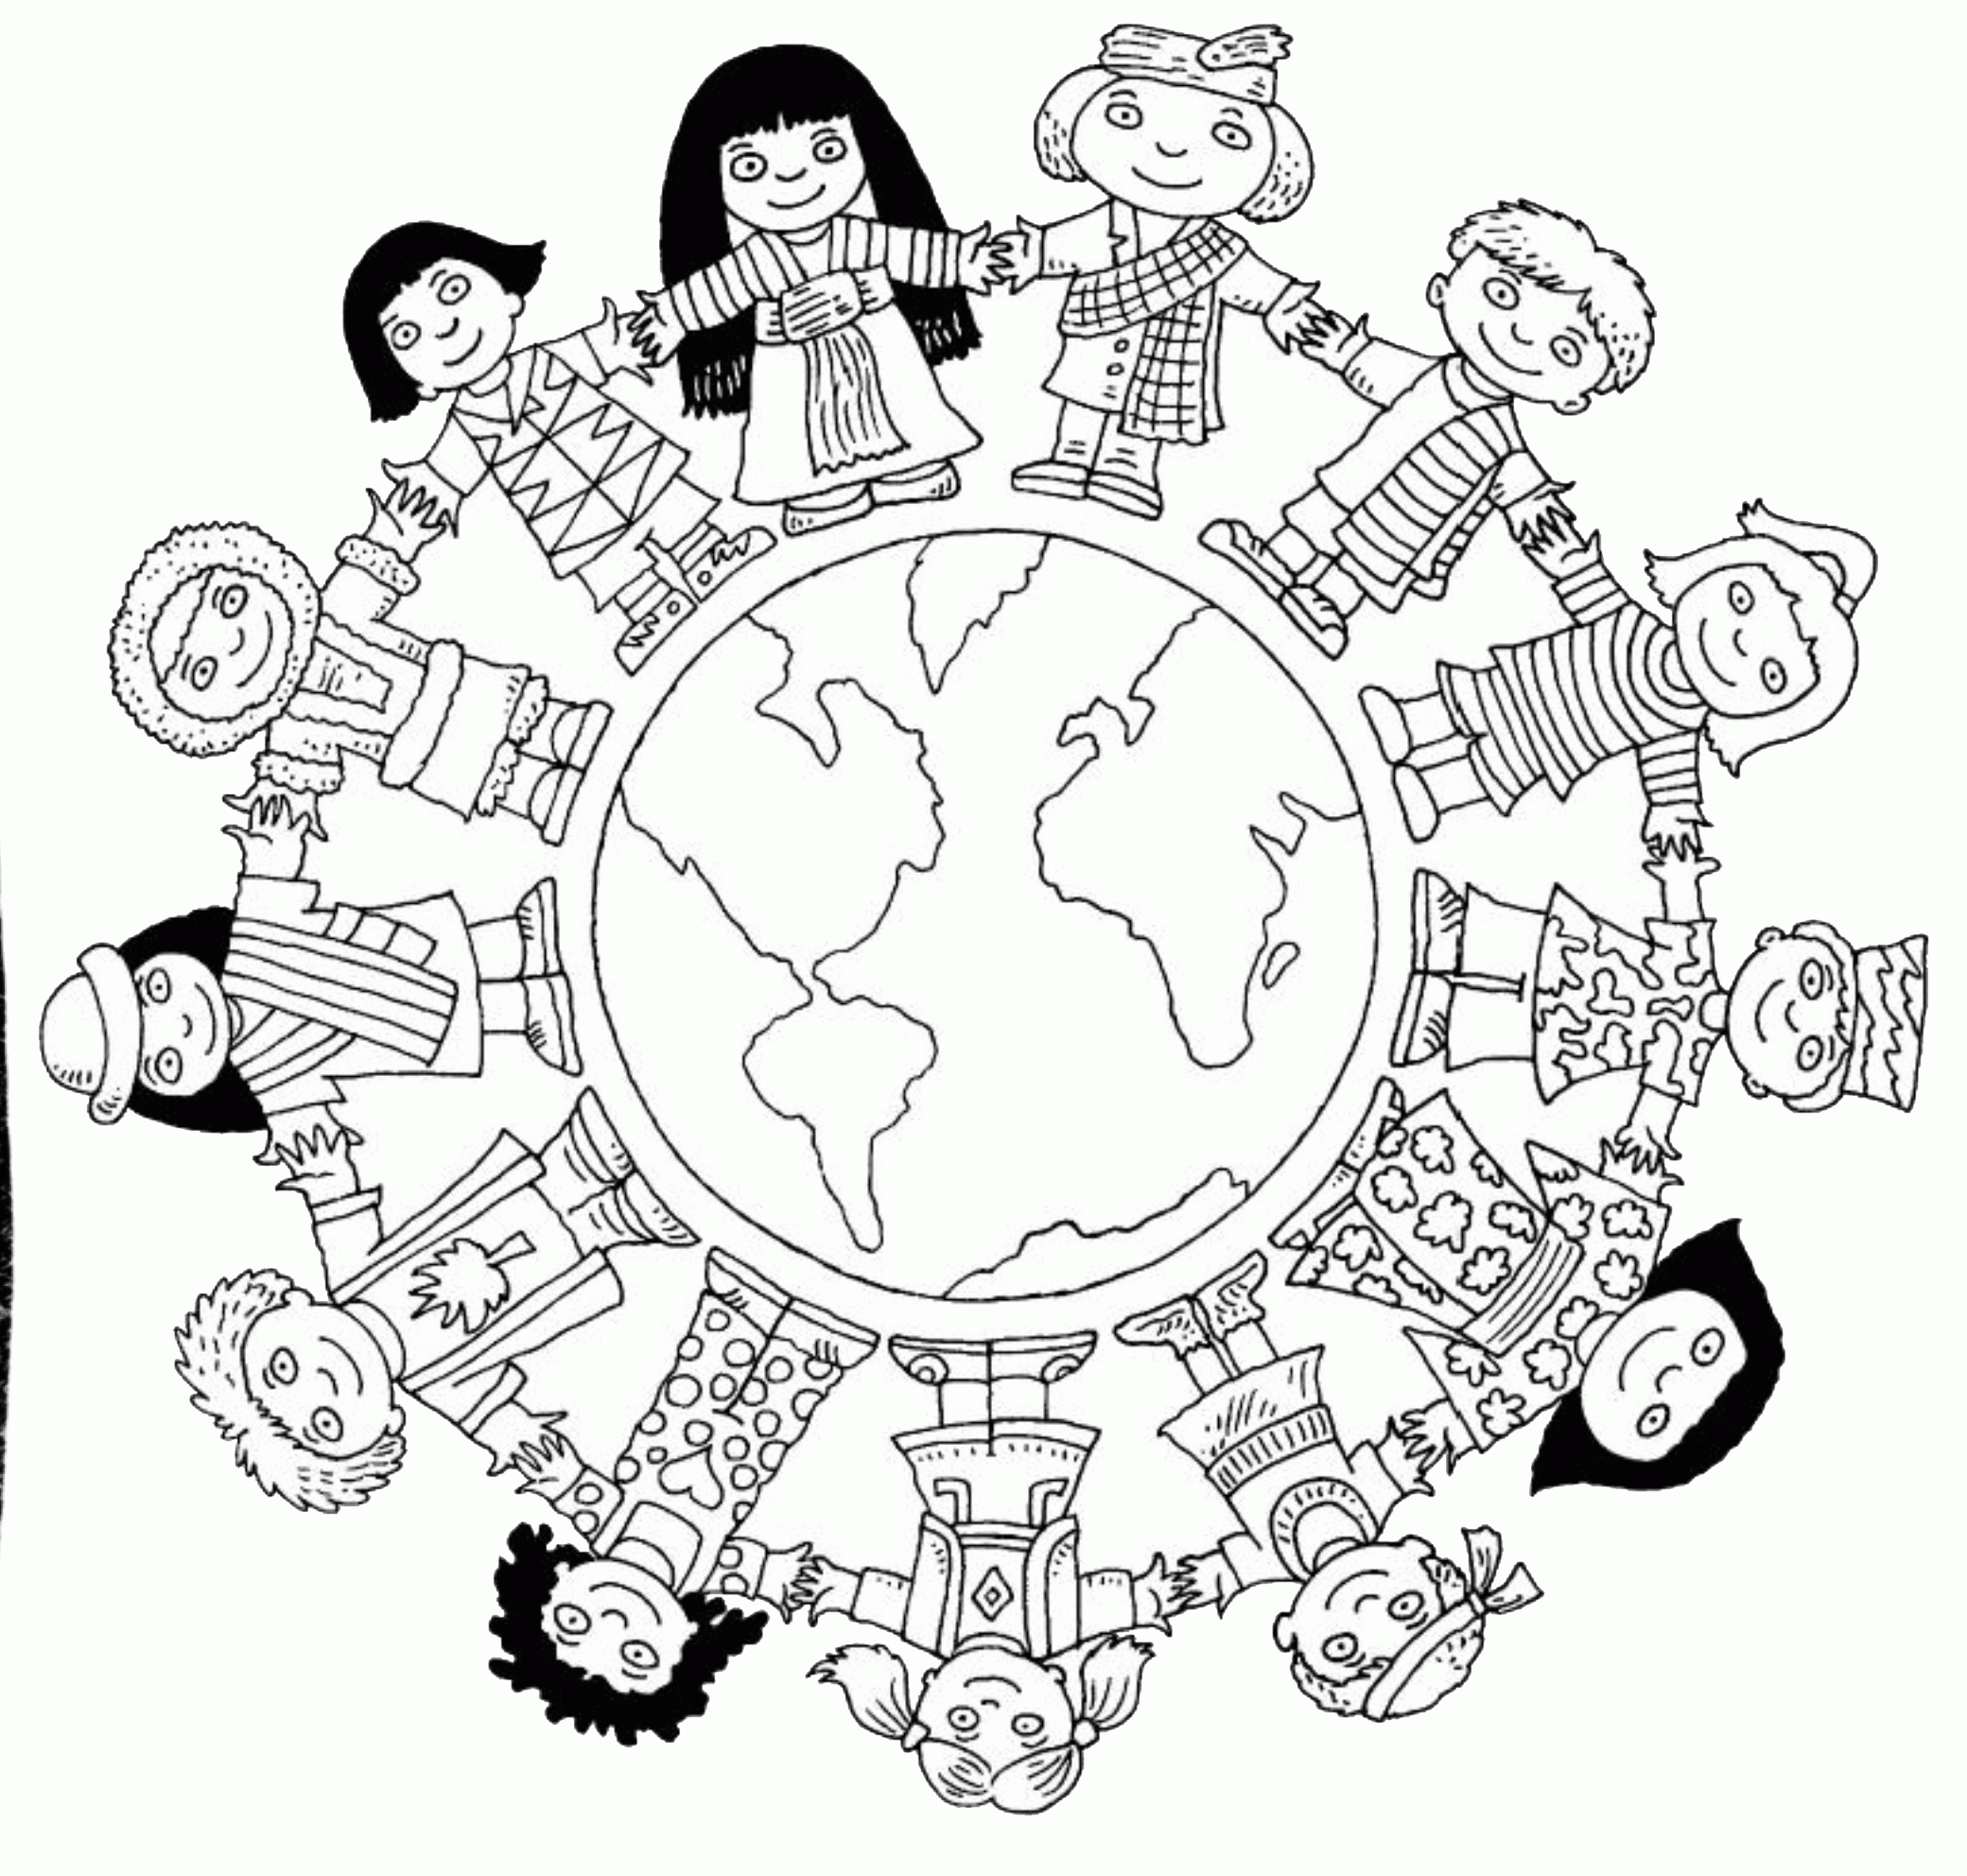 Forms Free Coloring Pages Of World Map Children - Widetheme